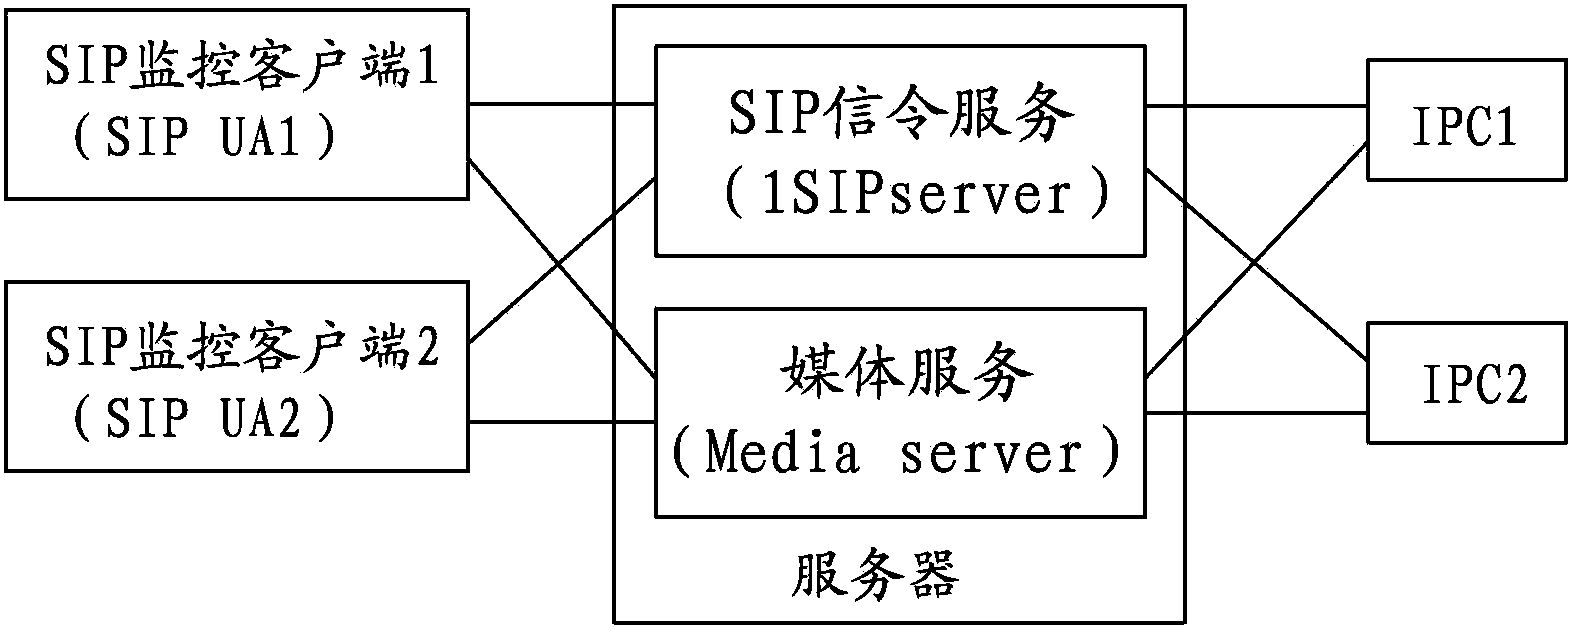 Video multicast achieving method based on session initiation protocol (SIP) monitoring system